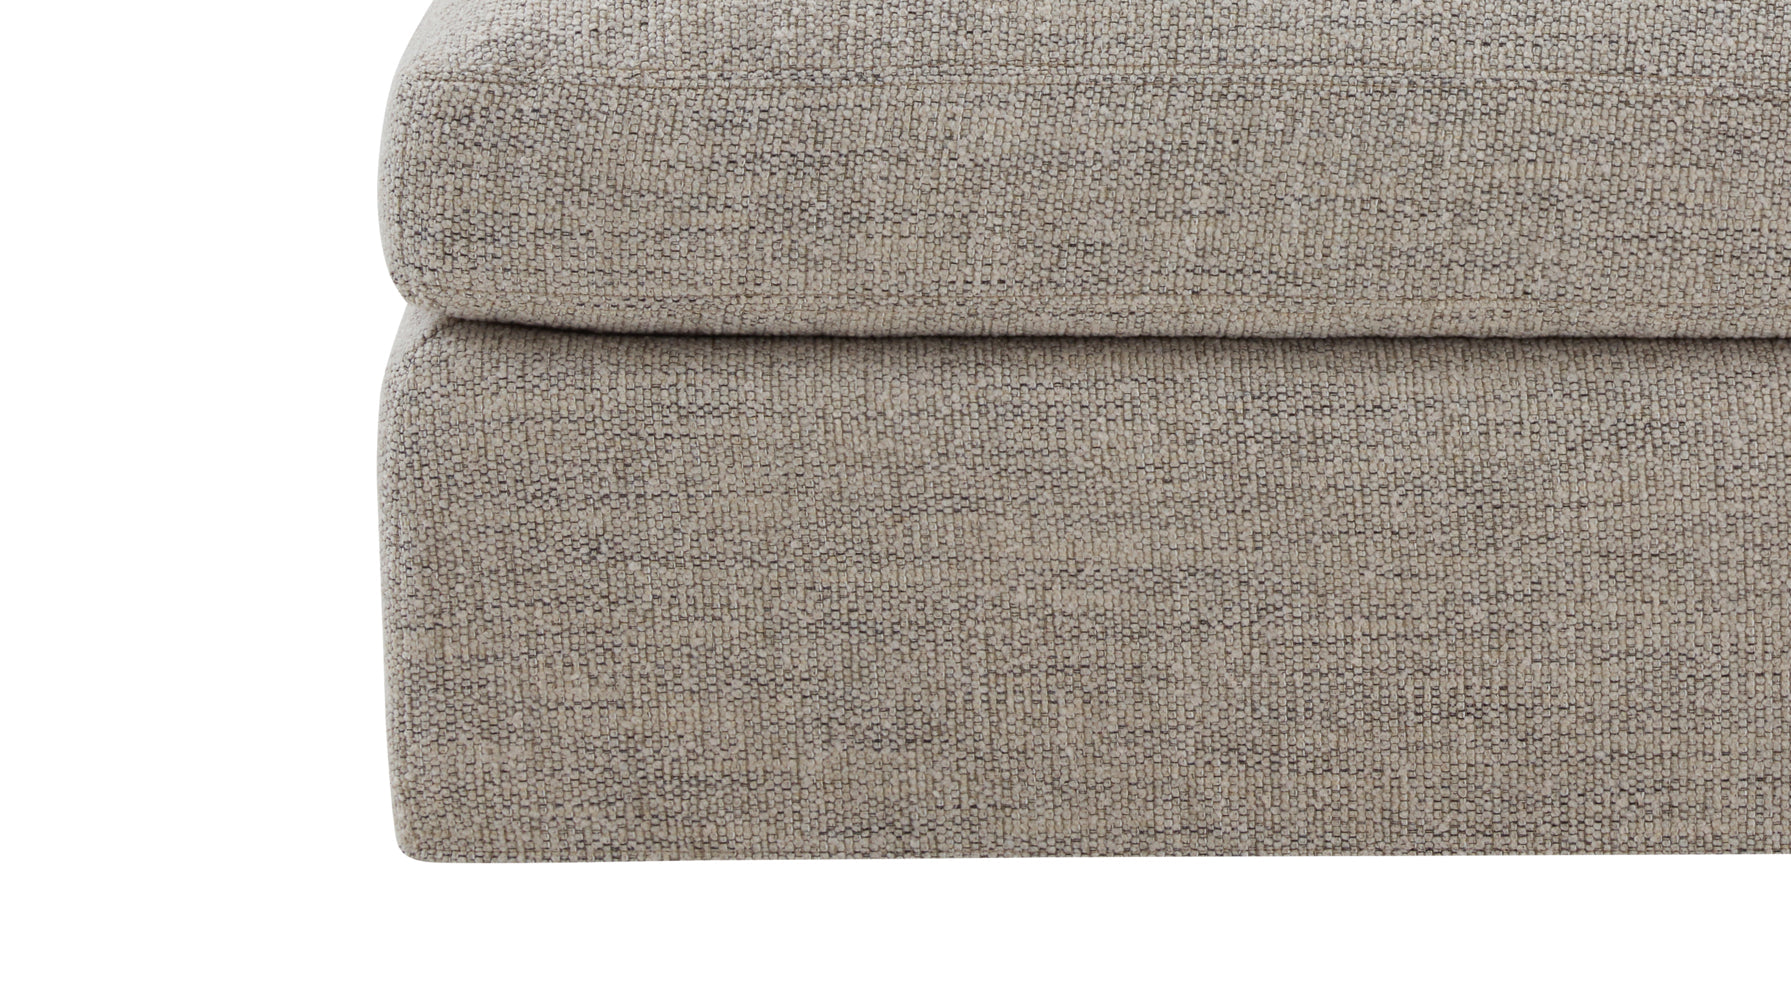 Get Together™ Ottoman, Large, Oatmeal - Image 6